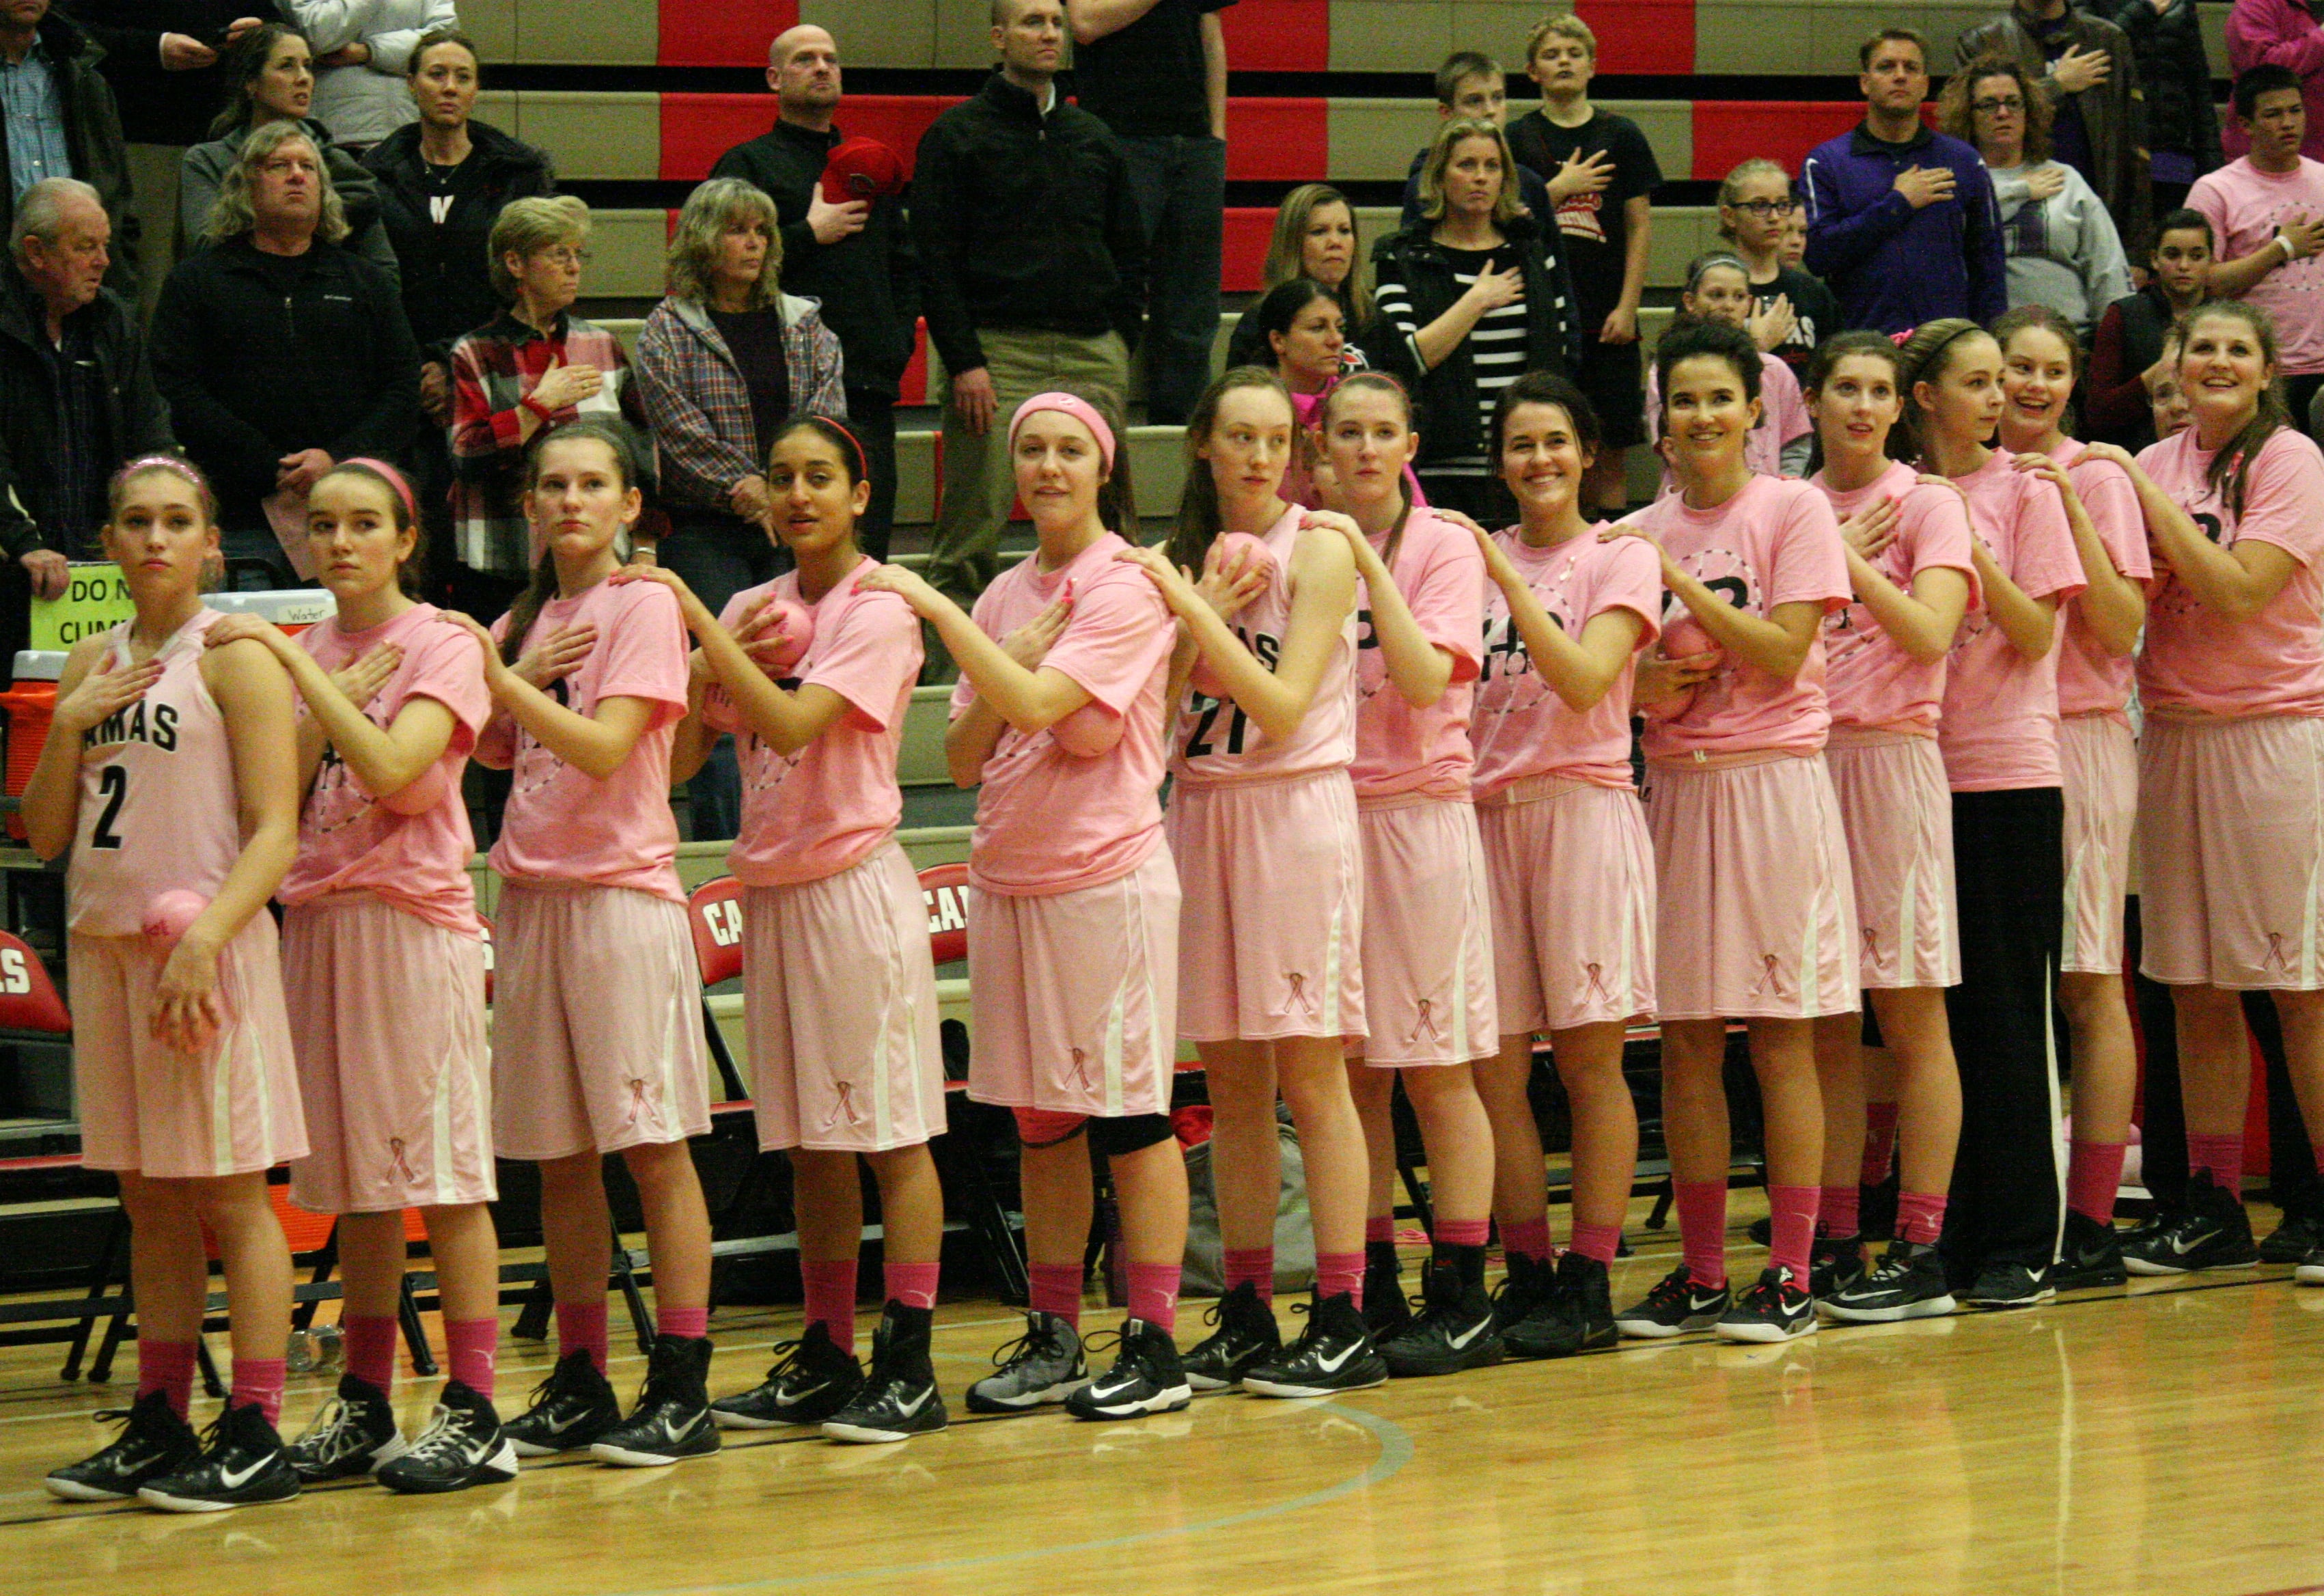 Anticipation builds for the Hoops For Pink girls basketball game.